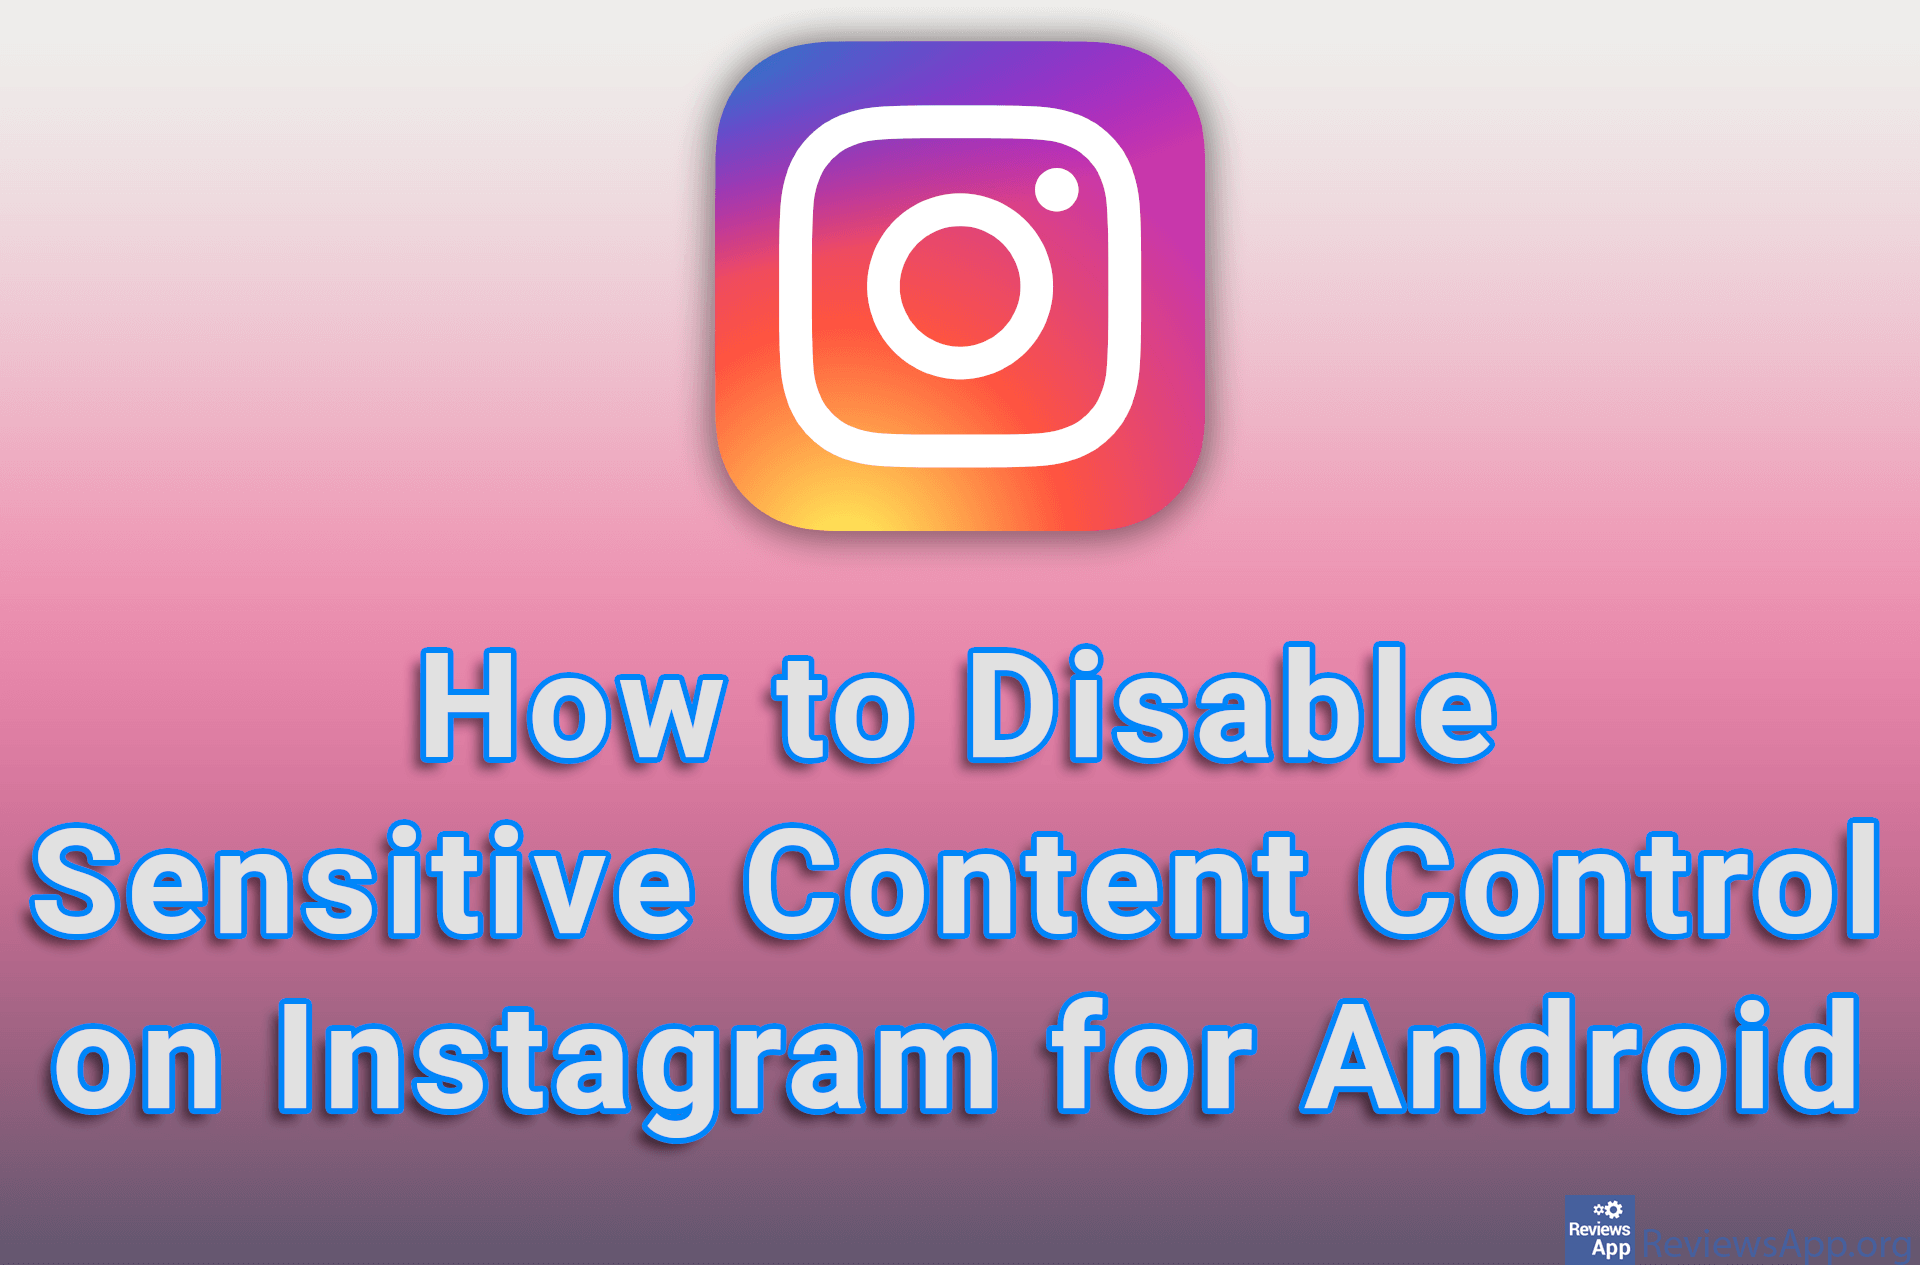 How to Disable Sensitive Content Control on Instagram for Android